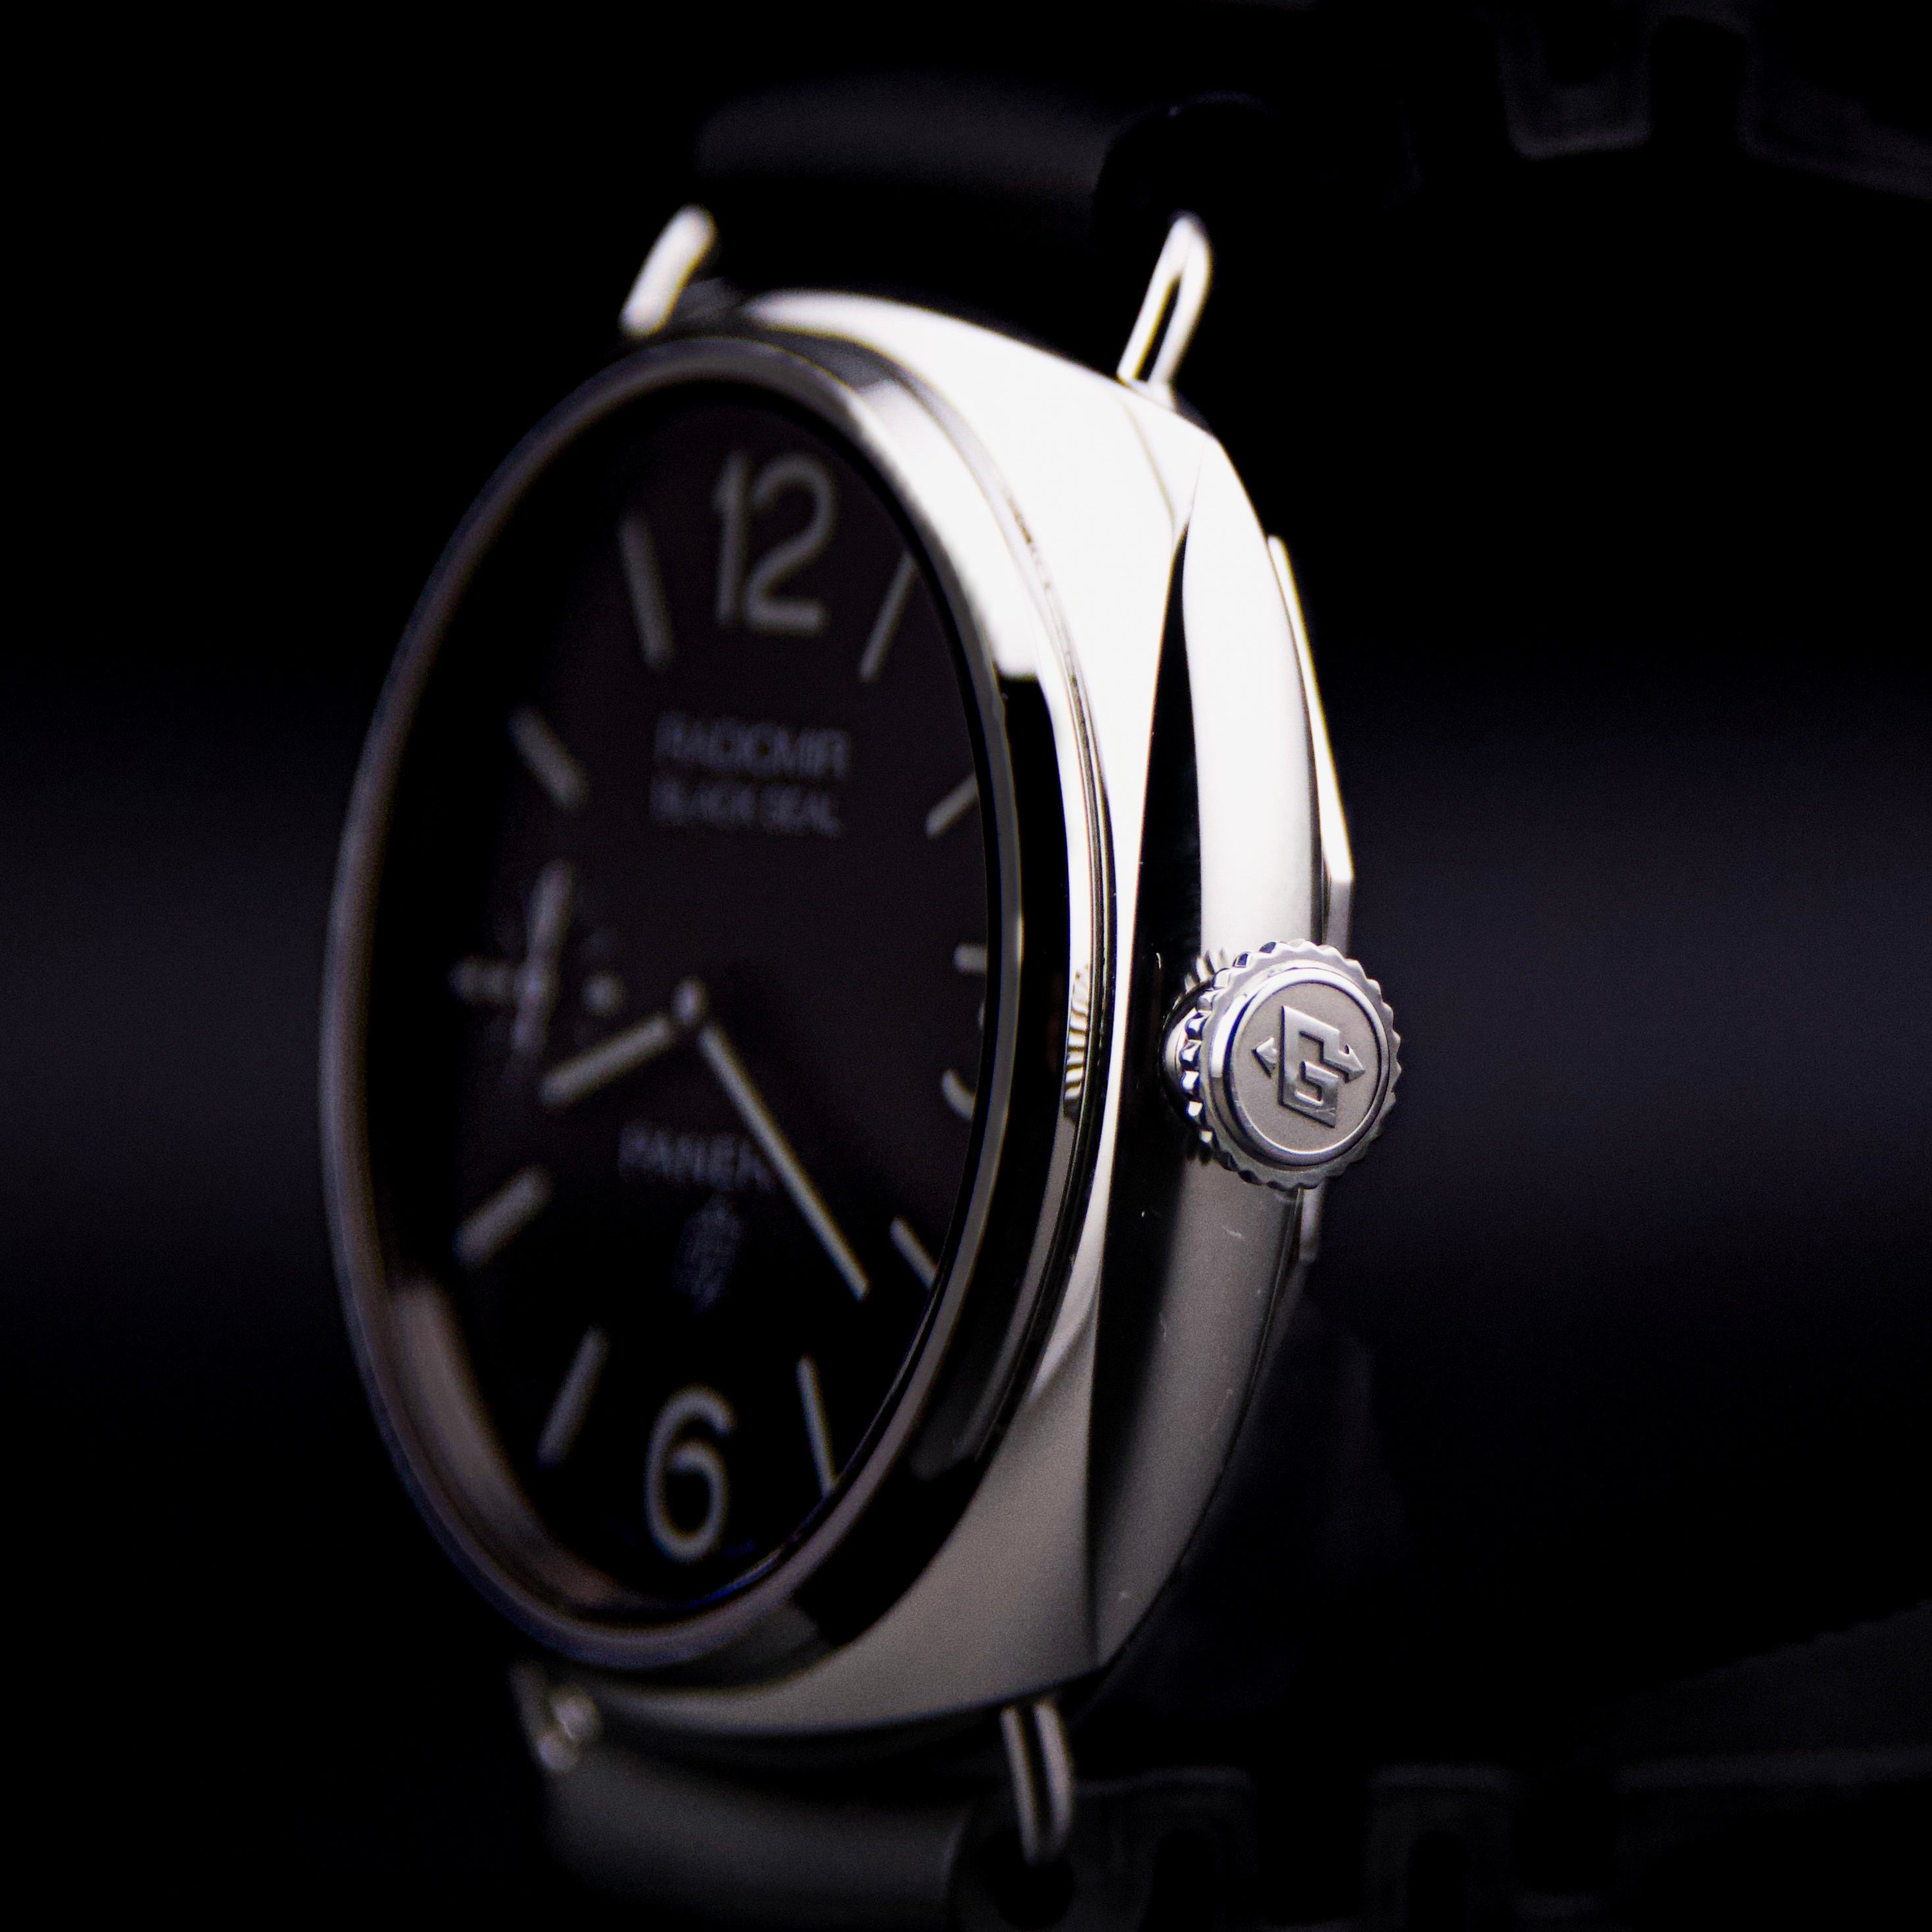 Panerai Radiomir Black Seal 45mm w/ Box and Papers